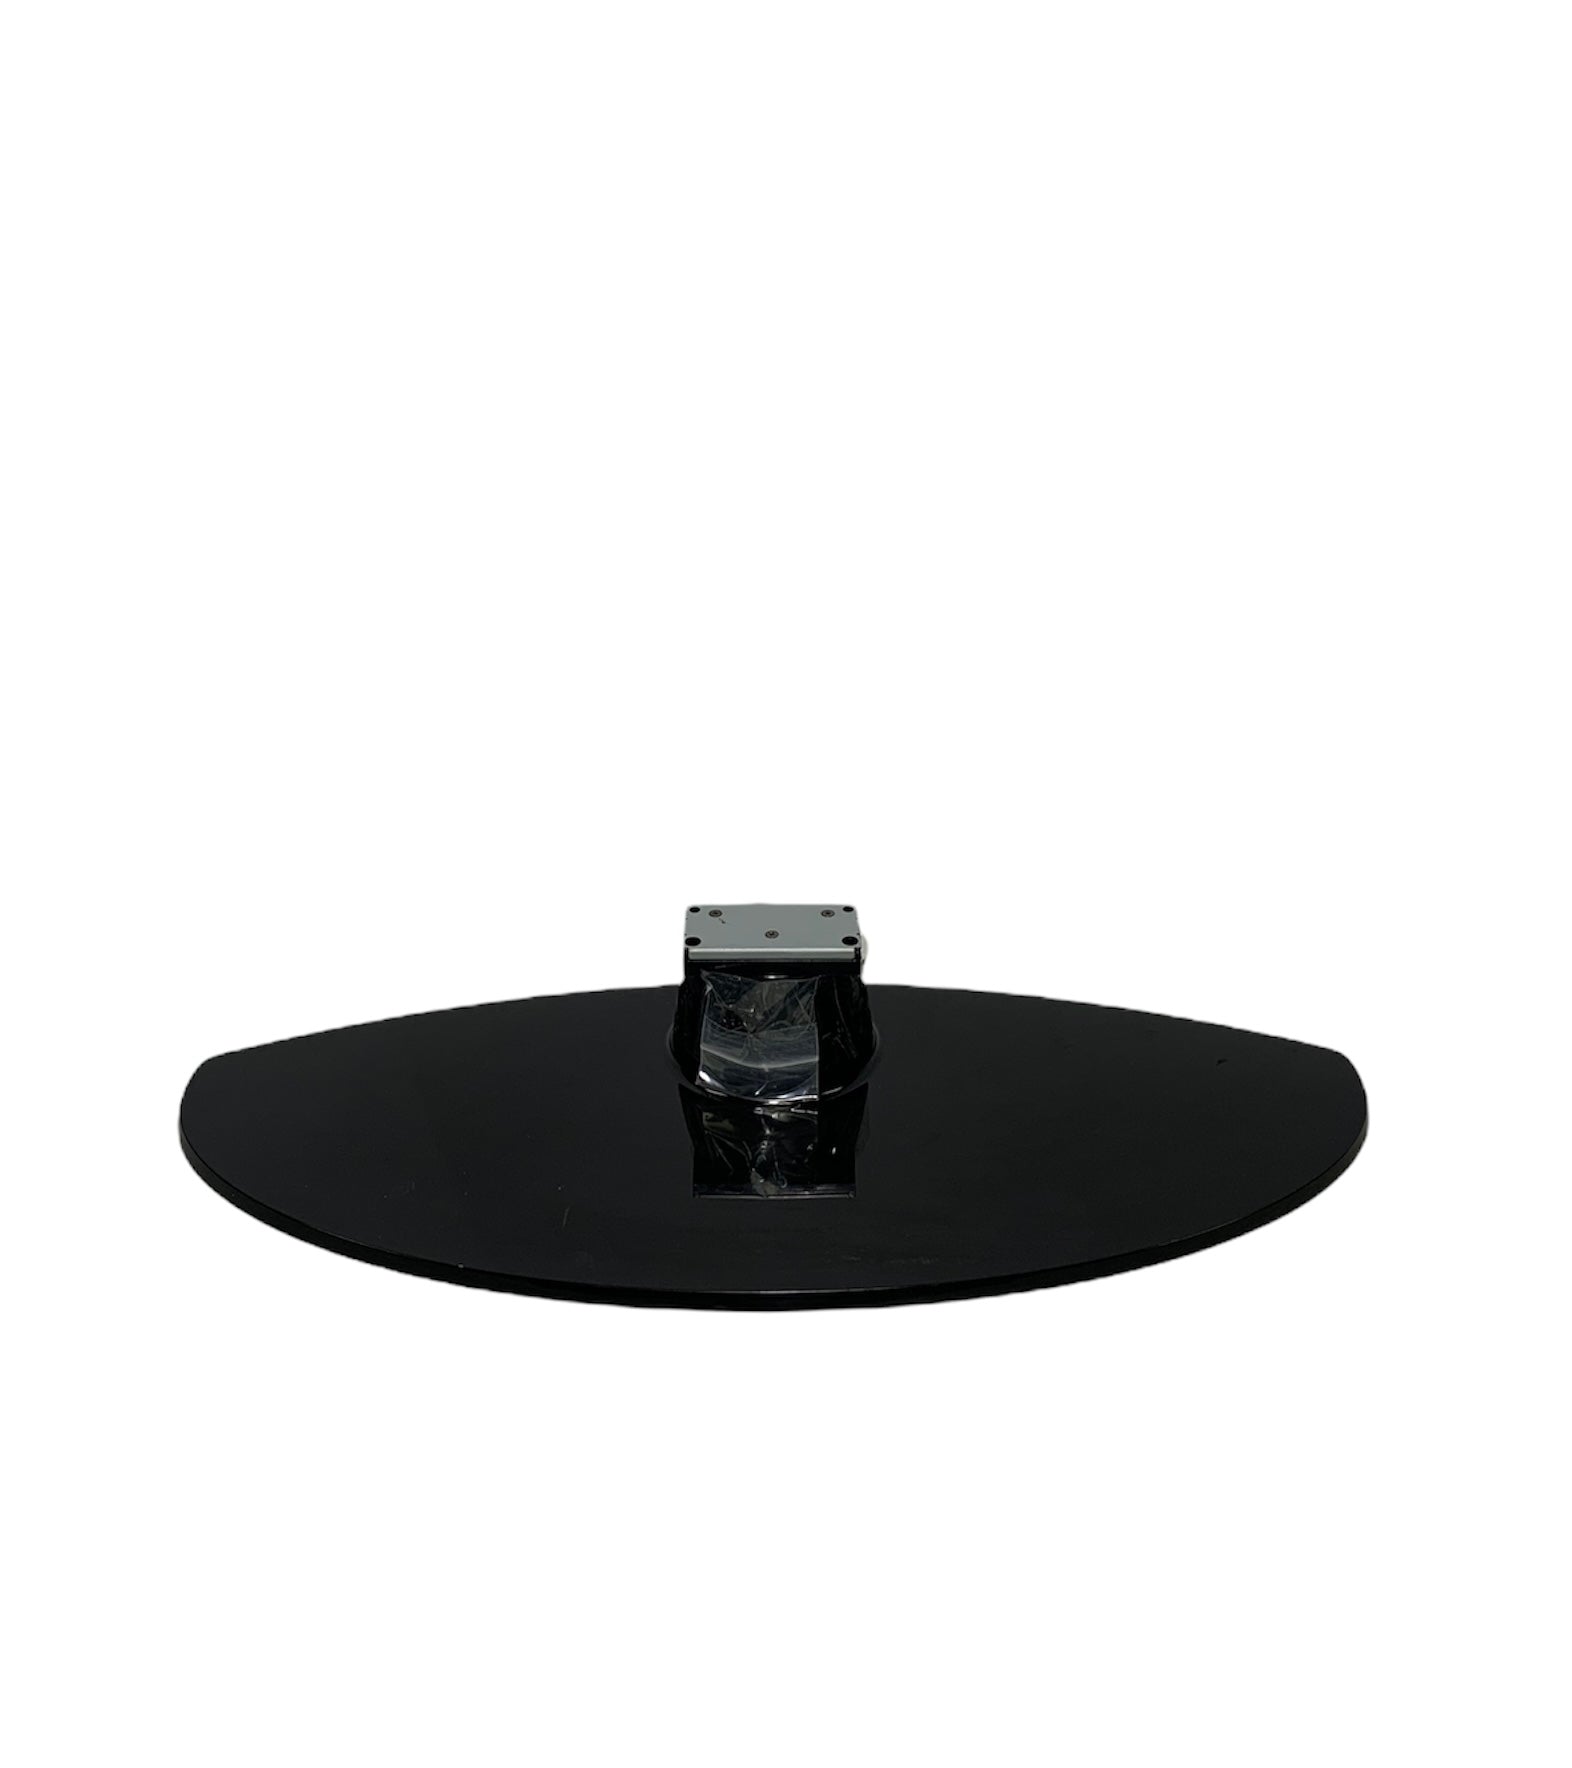 Westinghouse VR-3209DF TV Stand/Base